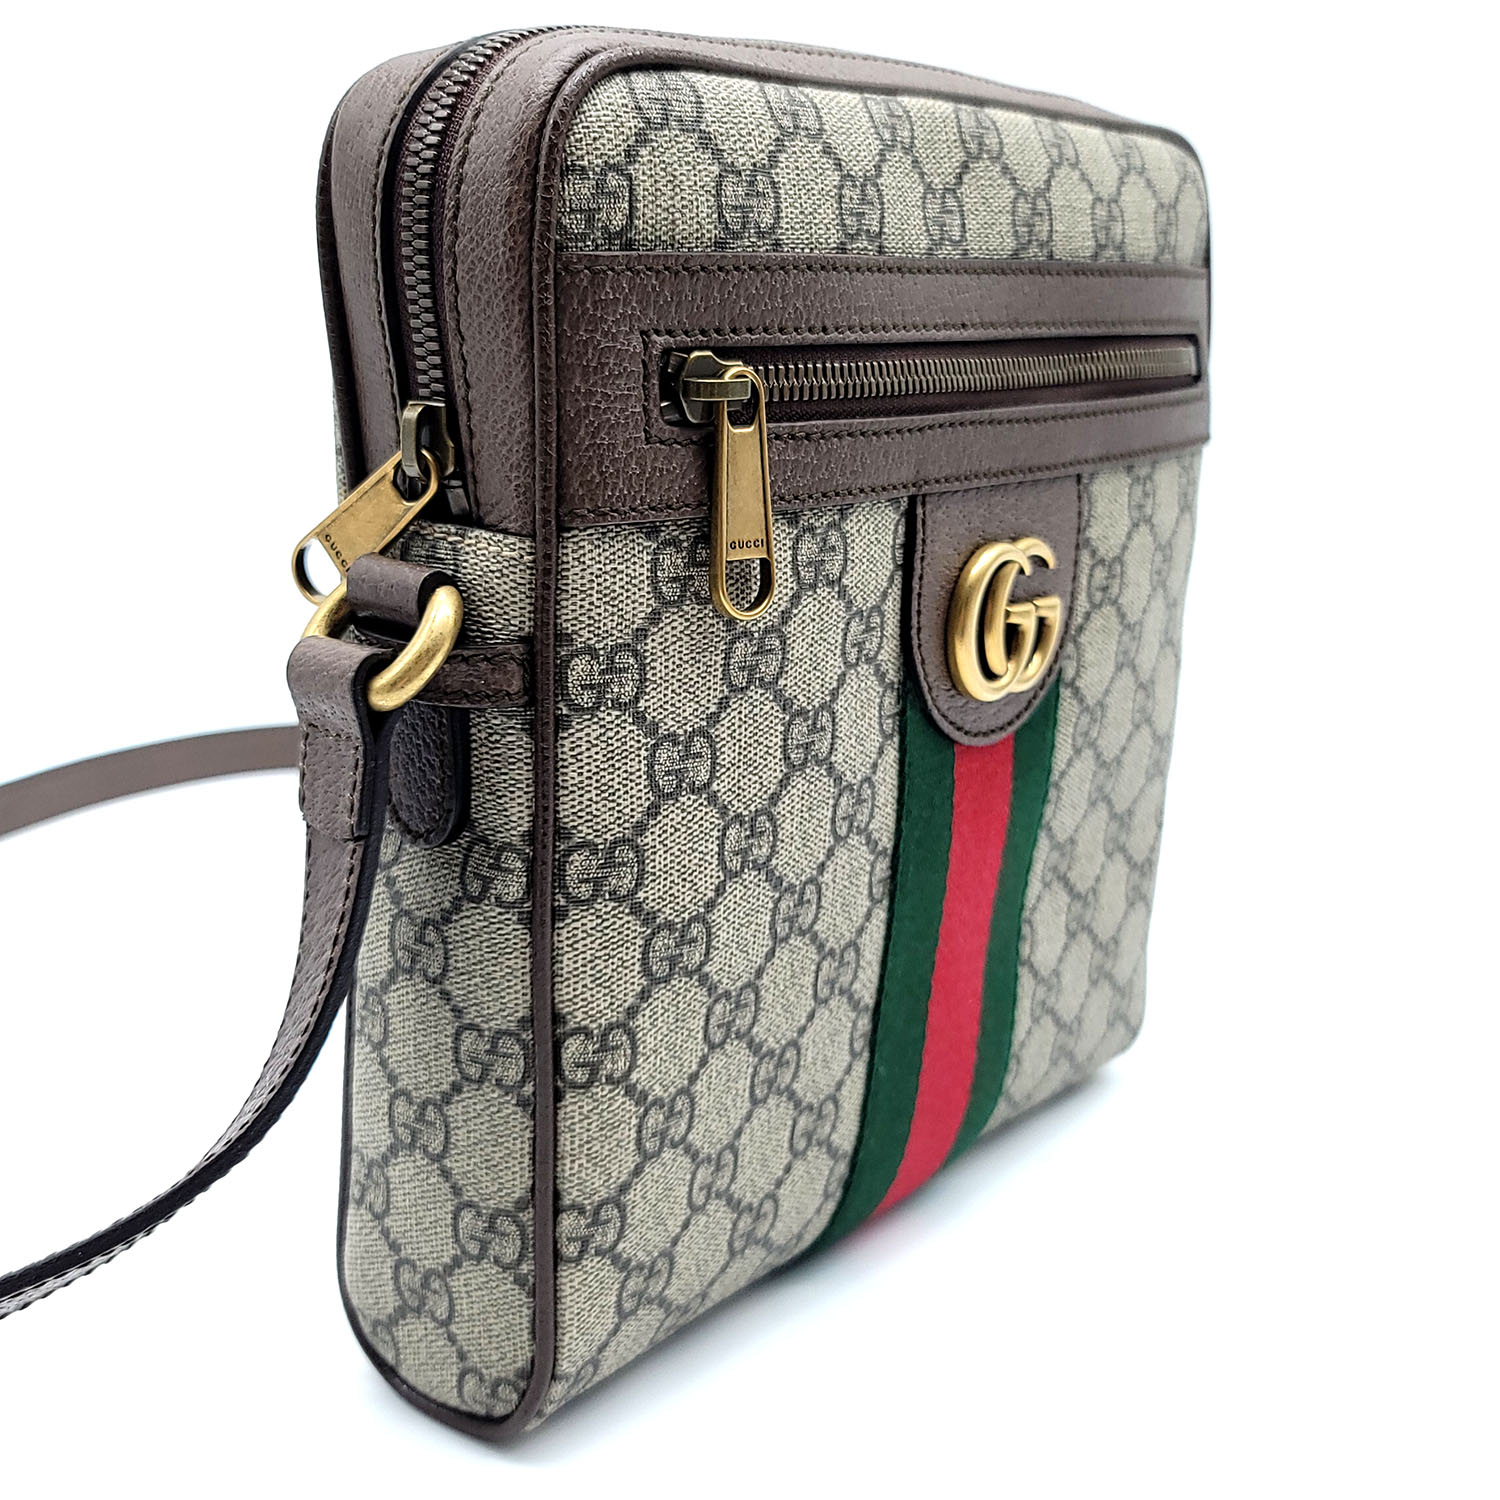 Shop GUCCI Ophidia 2019 SS Ophidia Gg Small Messenger Bag (547926